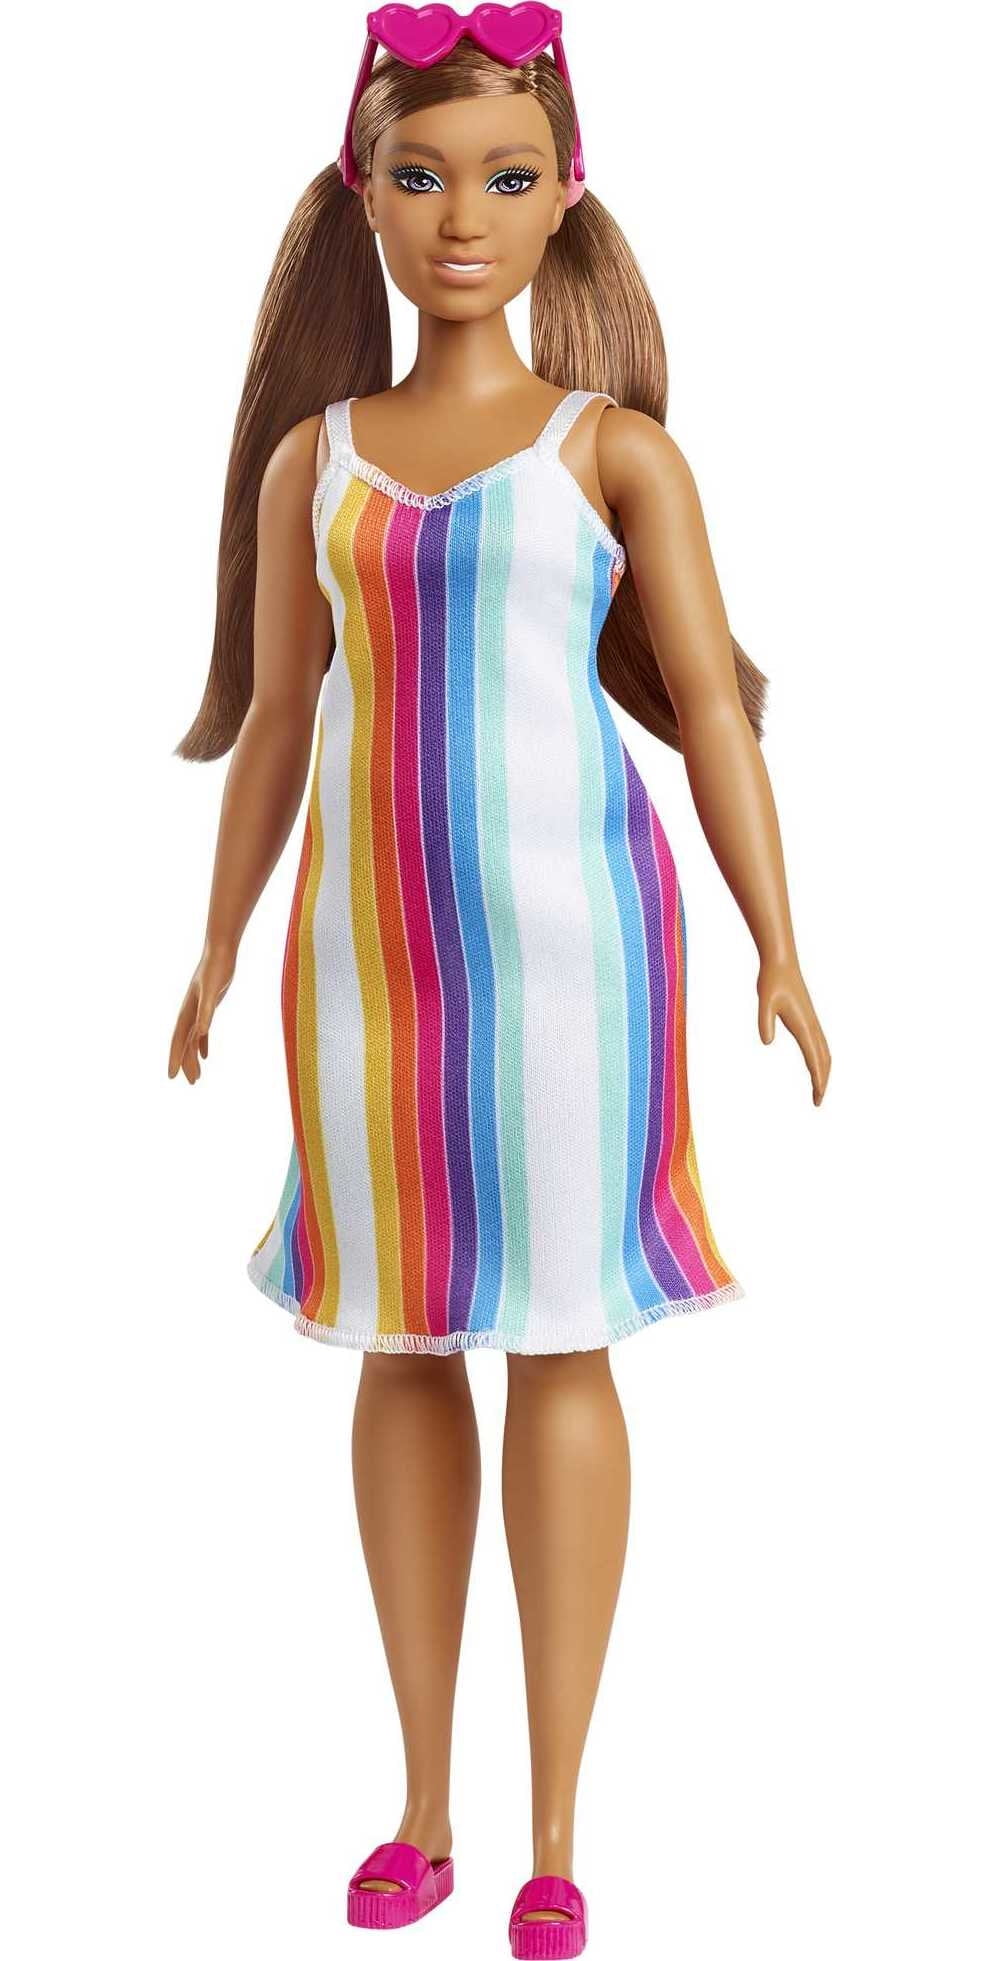 Barbie Loves the Ocean Doll (11.5in Curvy Made